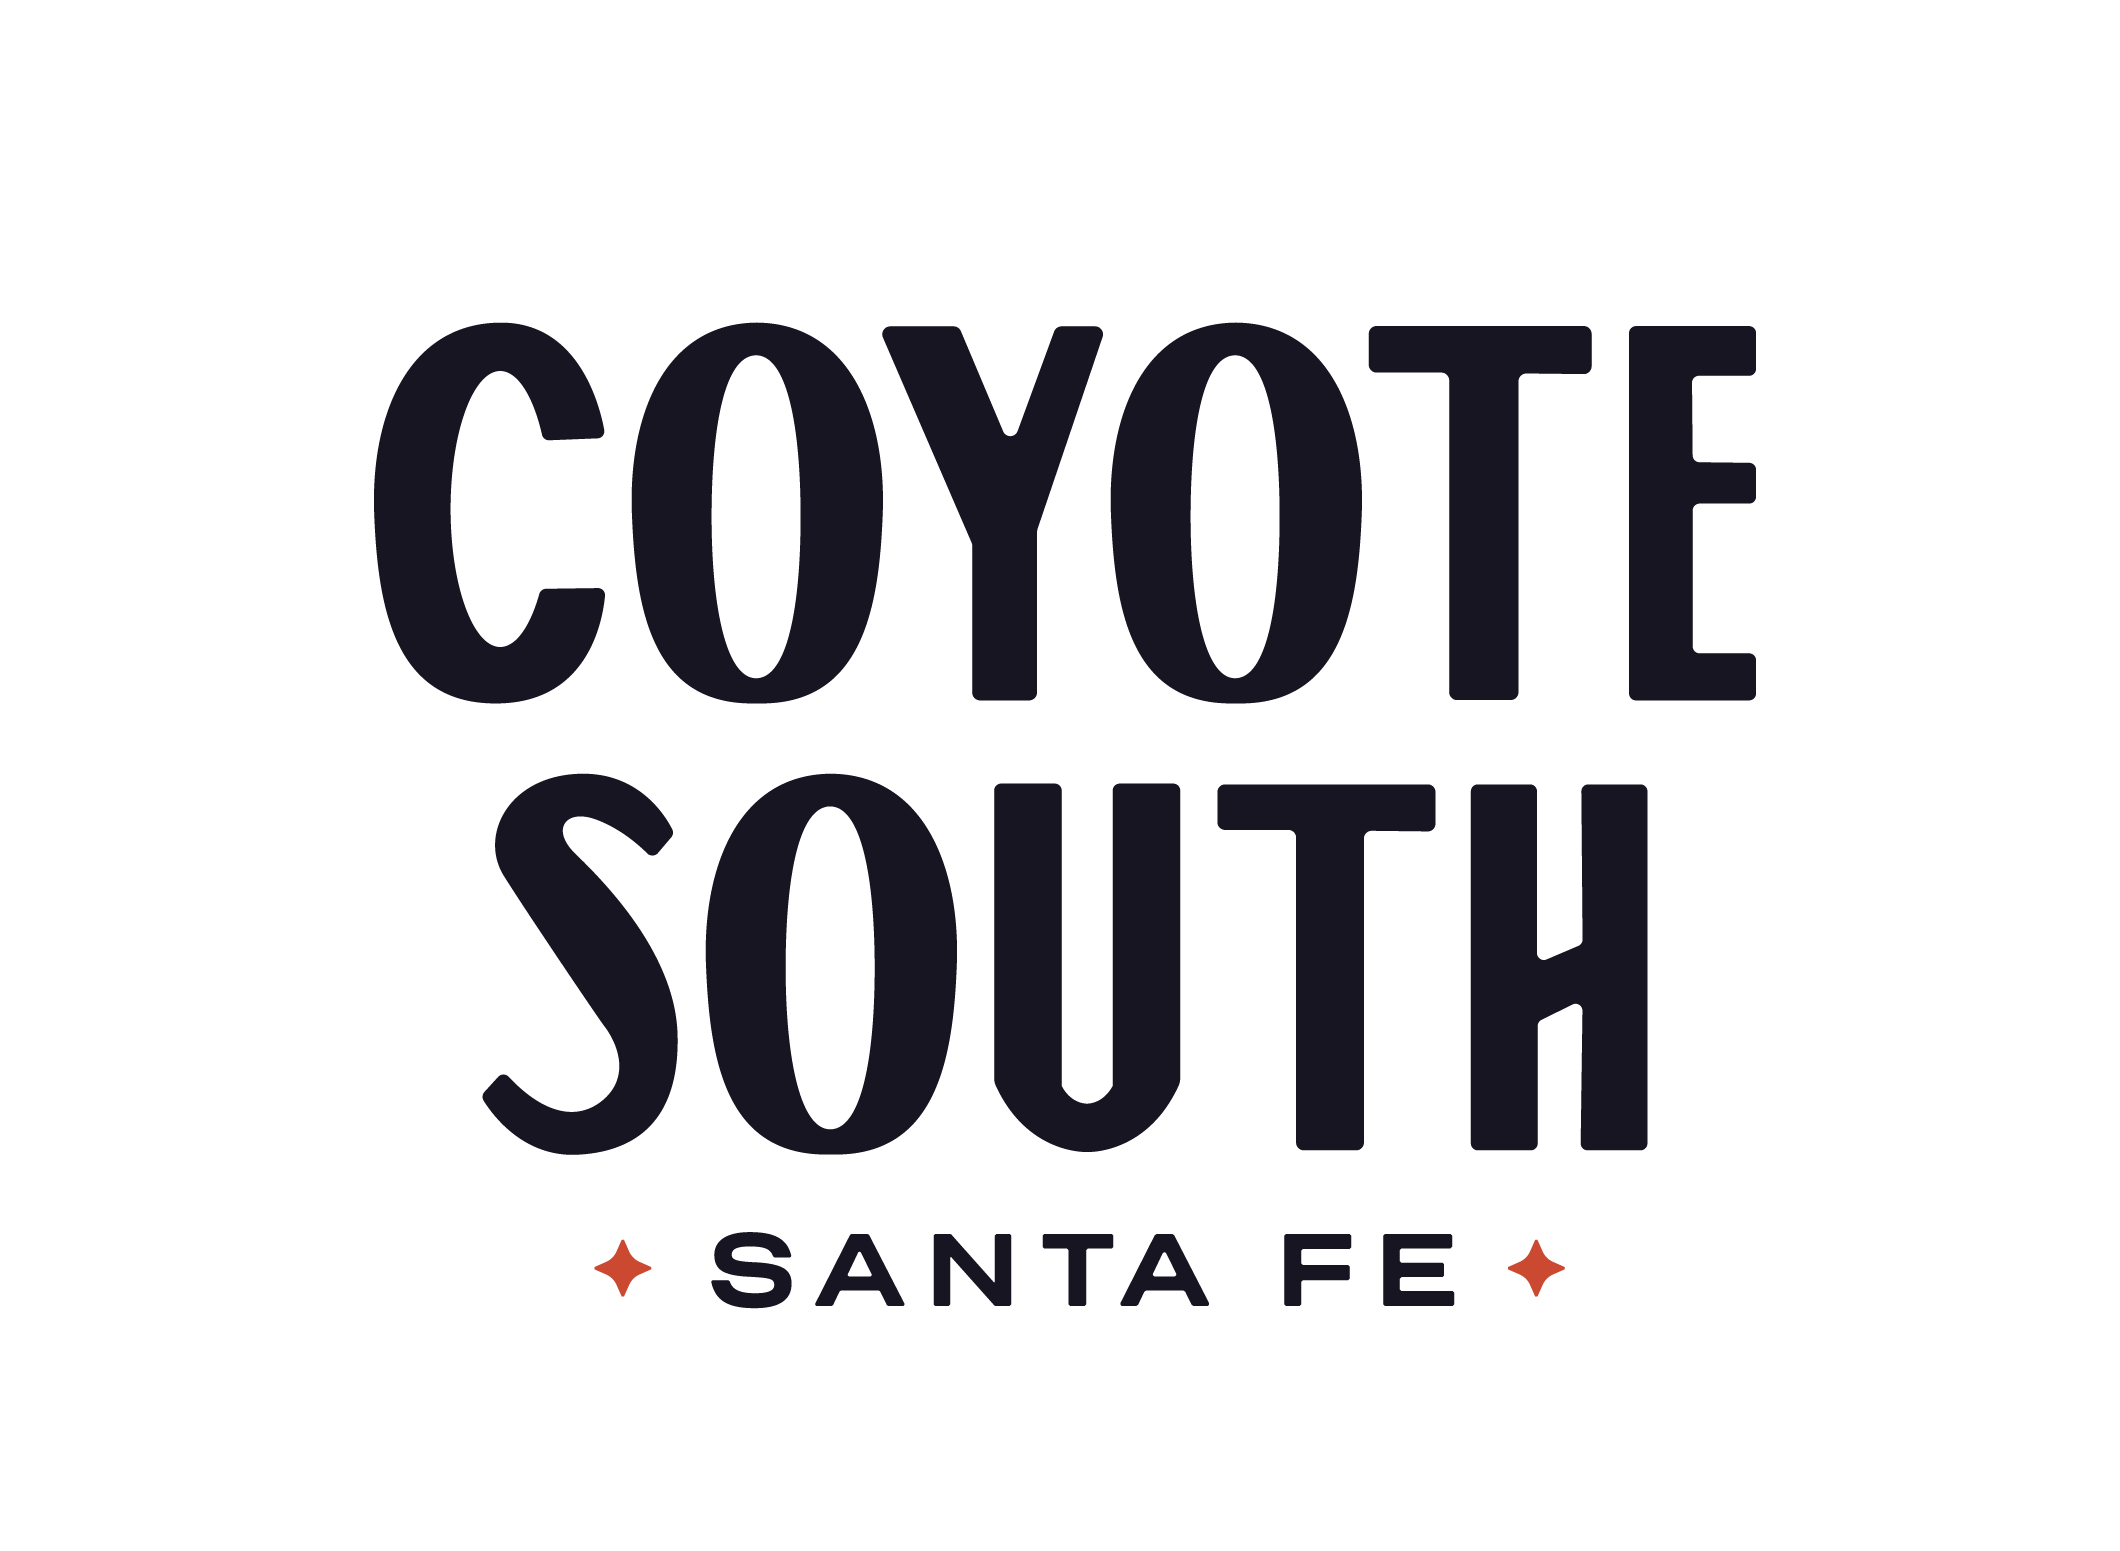 Coyote South logo